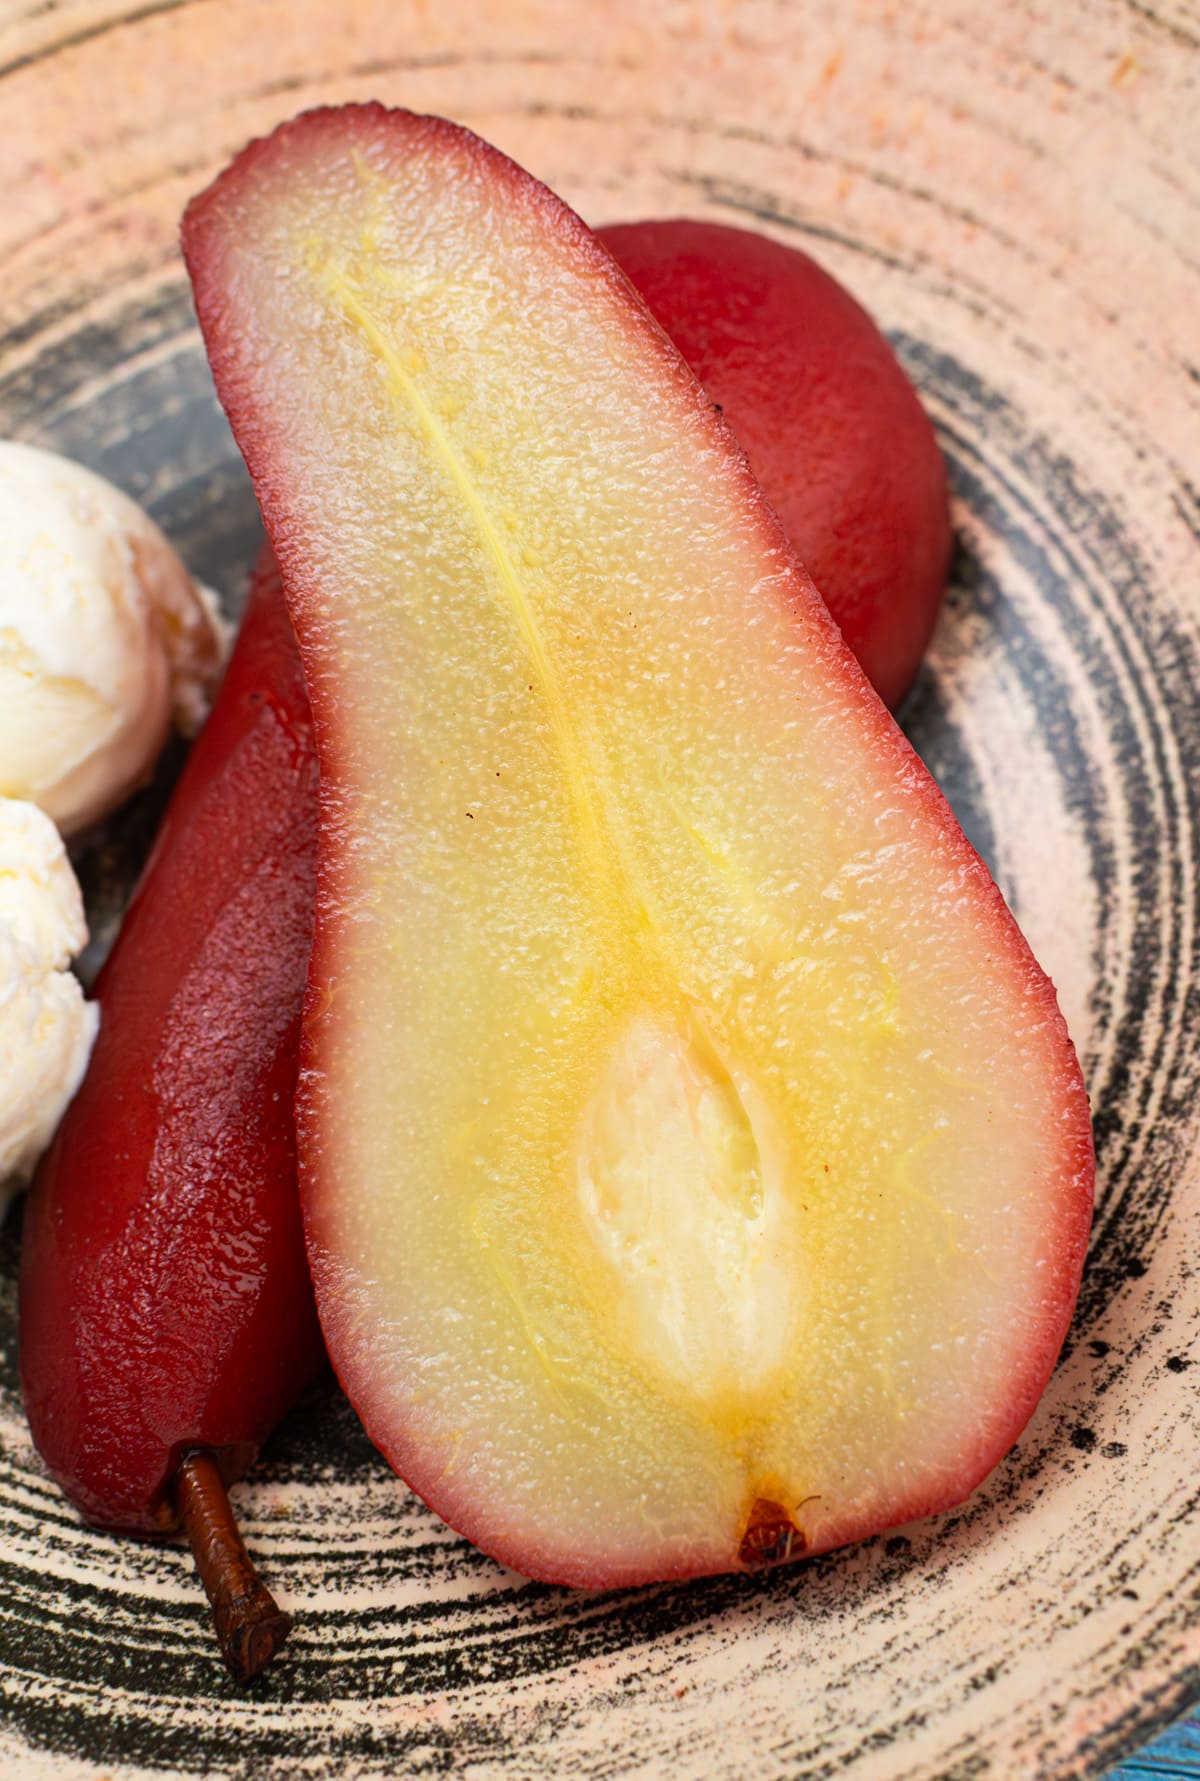 Poached pear halves near ice cream in a vintage plate on a blue wooden table.